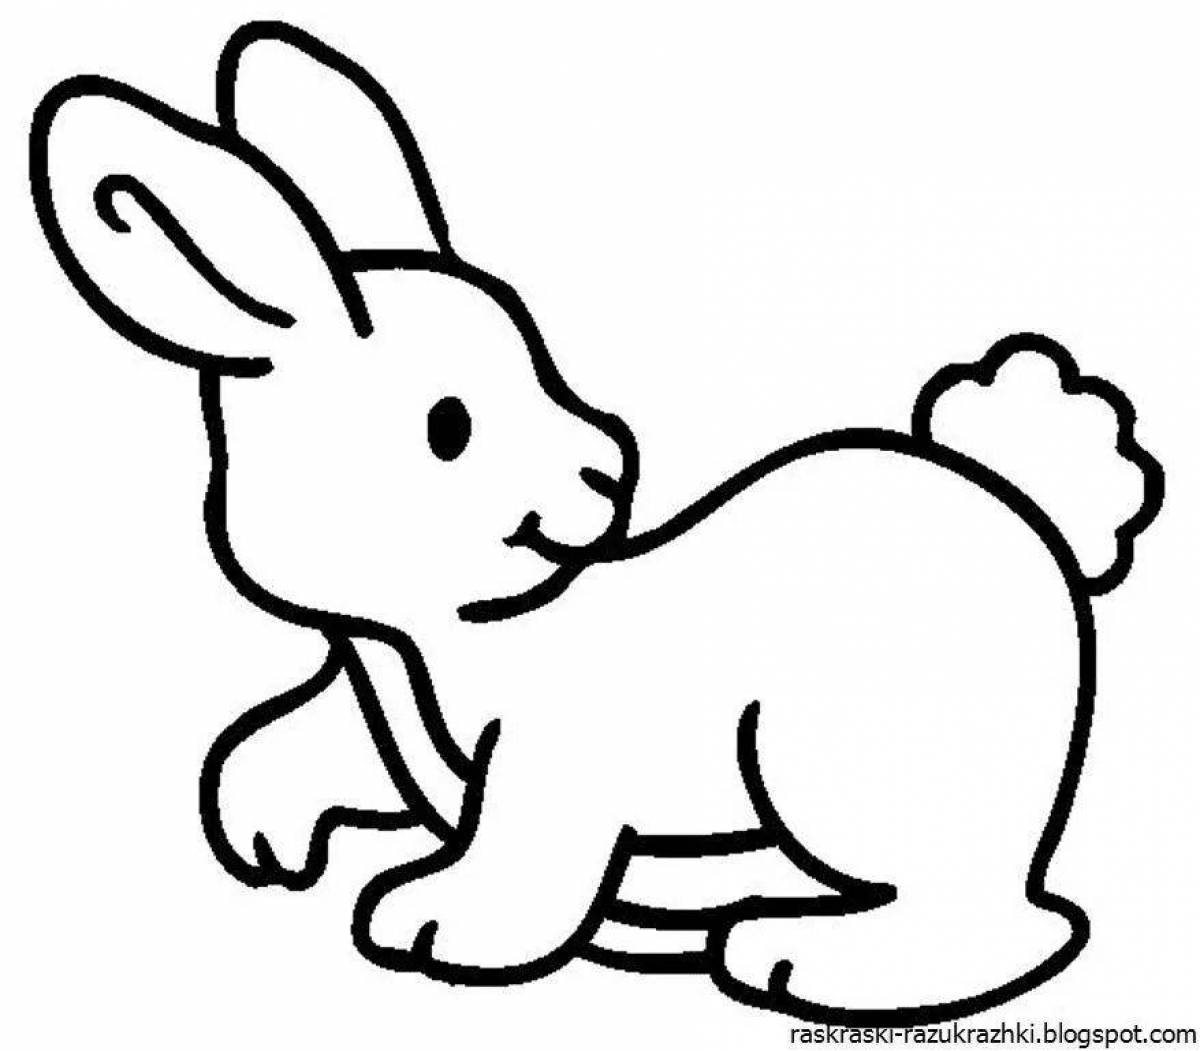 Adorable rabbit coloring book for kids